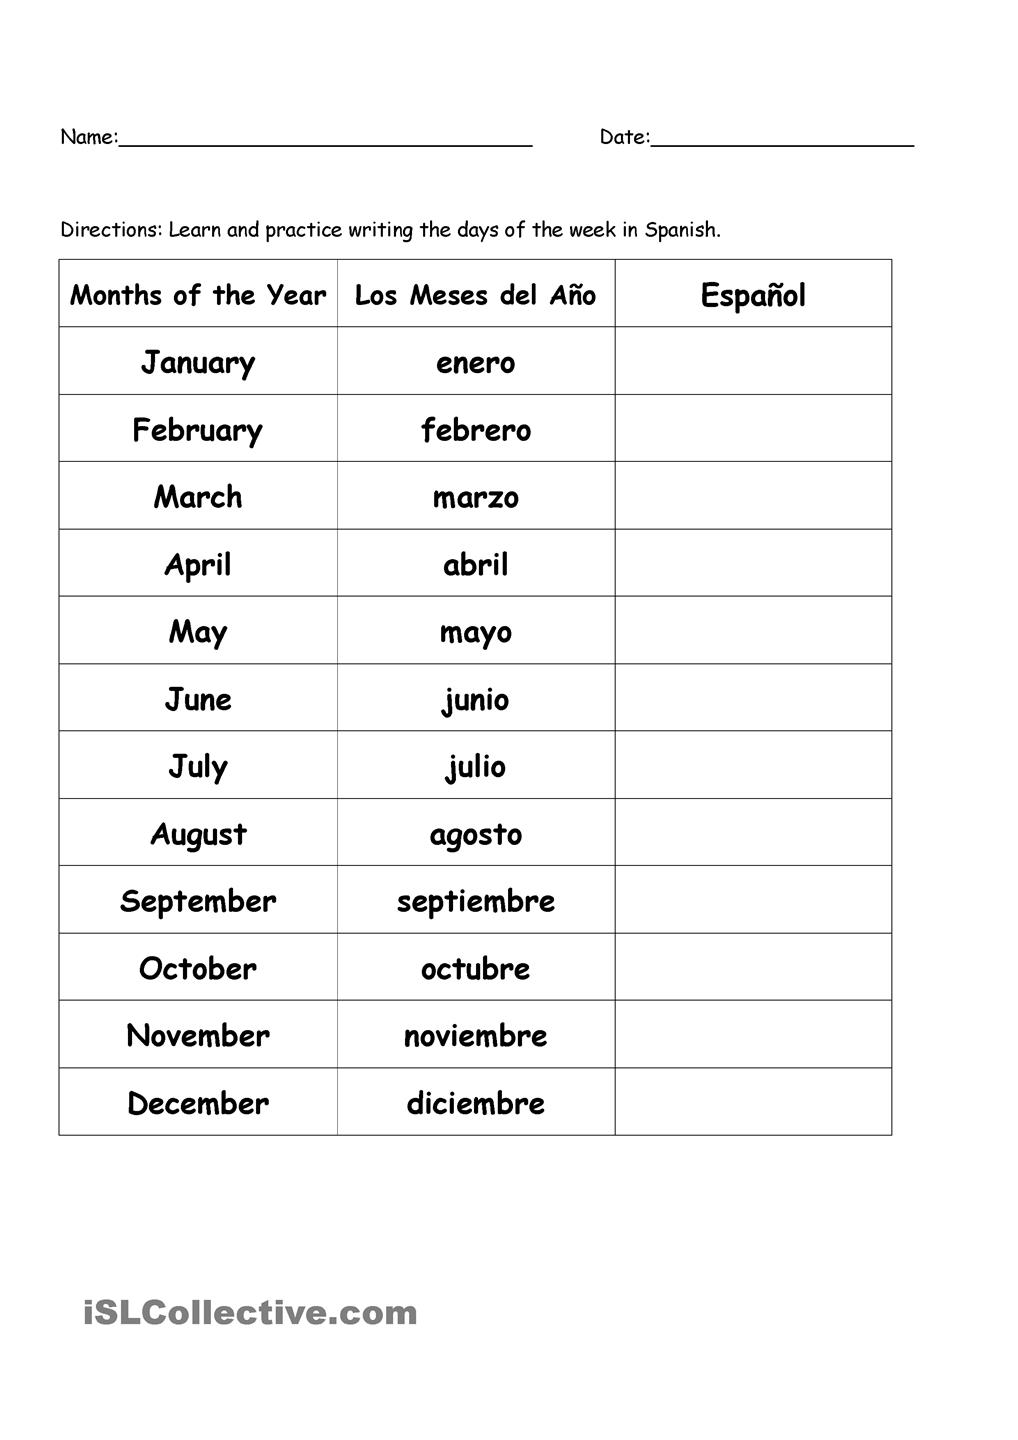 13-best-images-of-spanish-months-worksheet-spanish-months-of-year